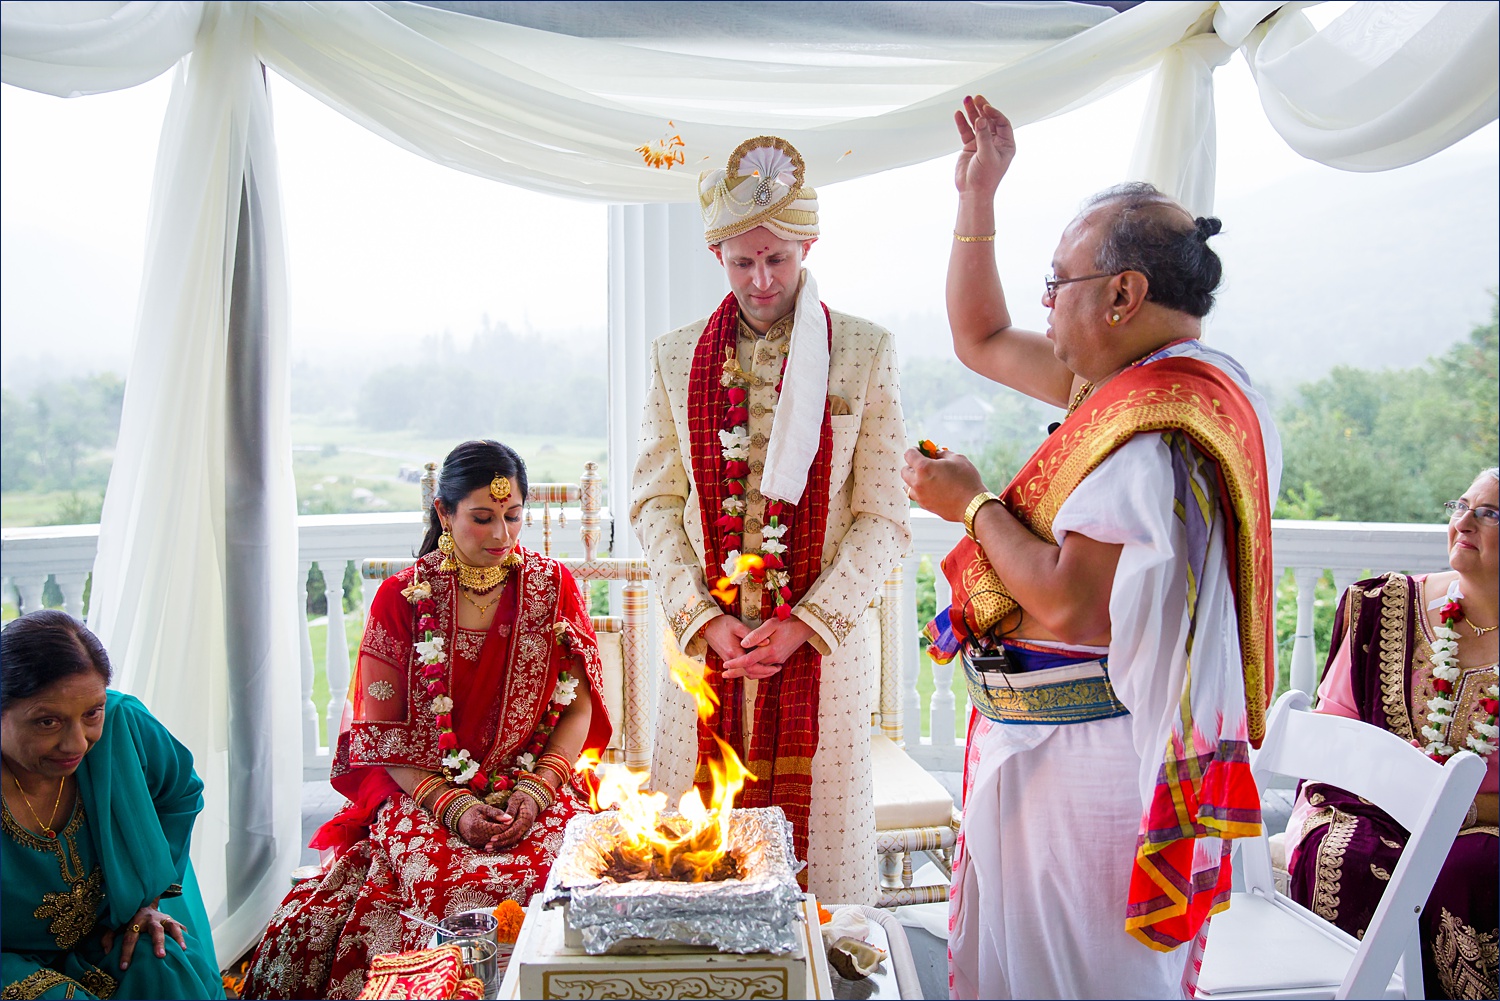 Agni Poojan and Gathbandhan and throwing marigold flowers over the couple during the Bretton Woods NH ceremony